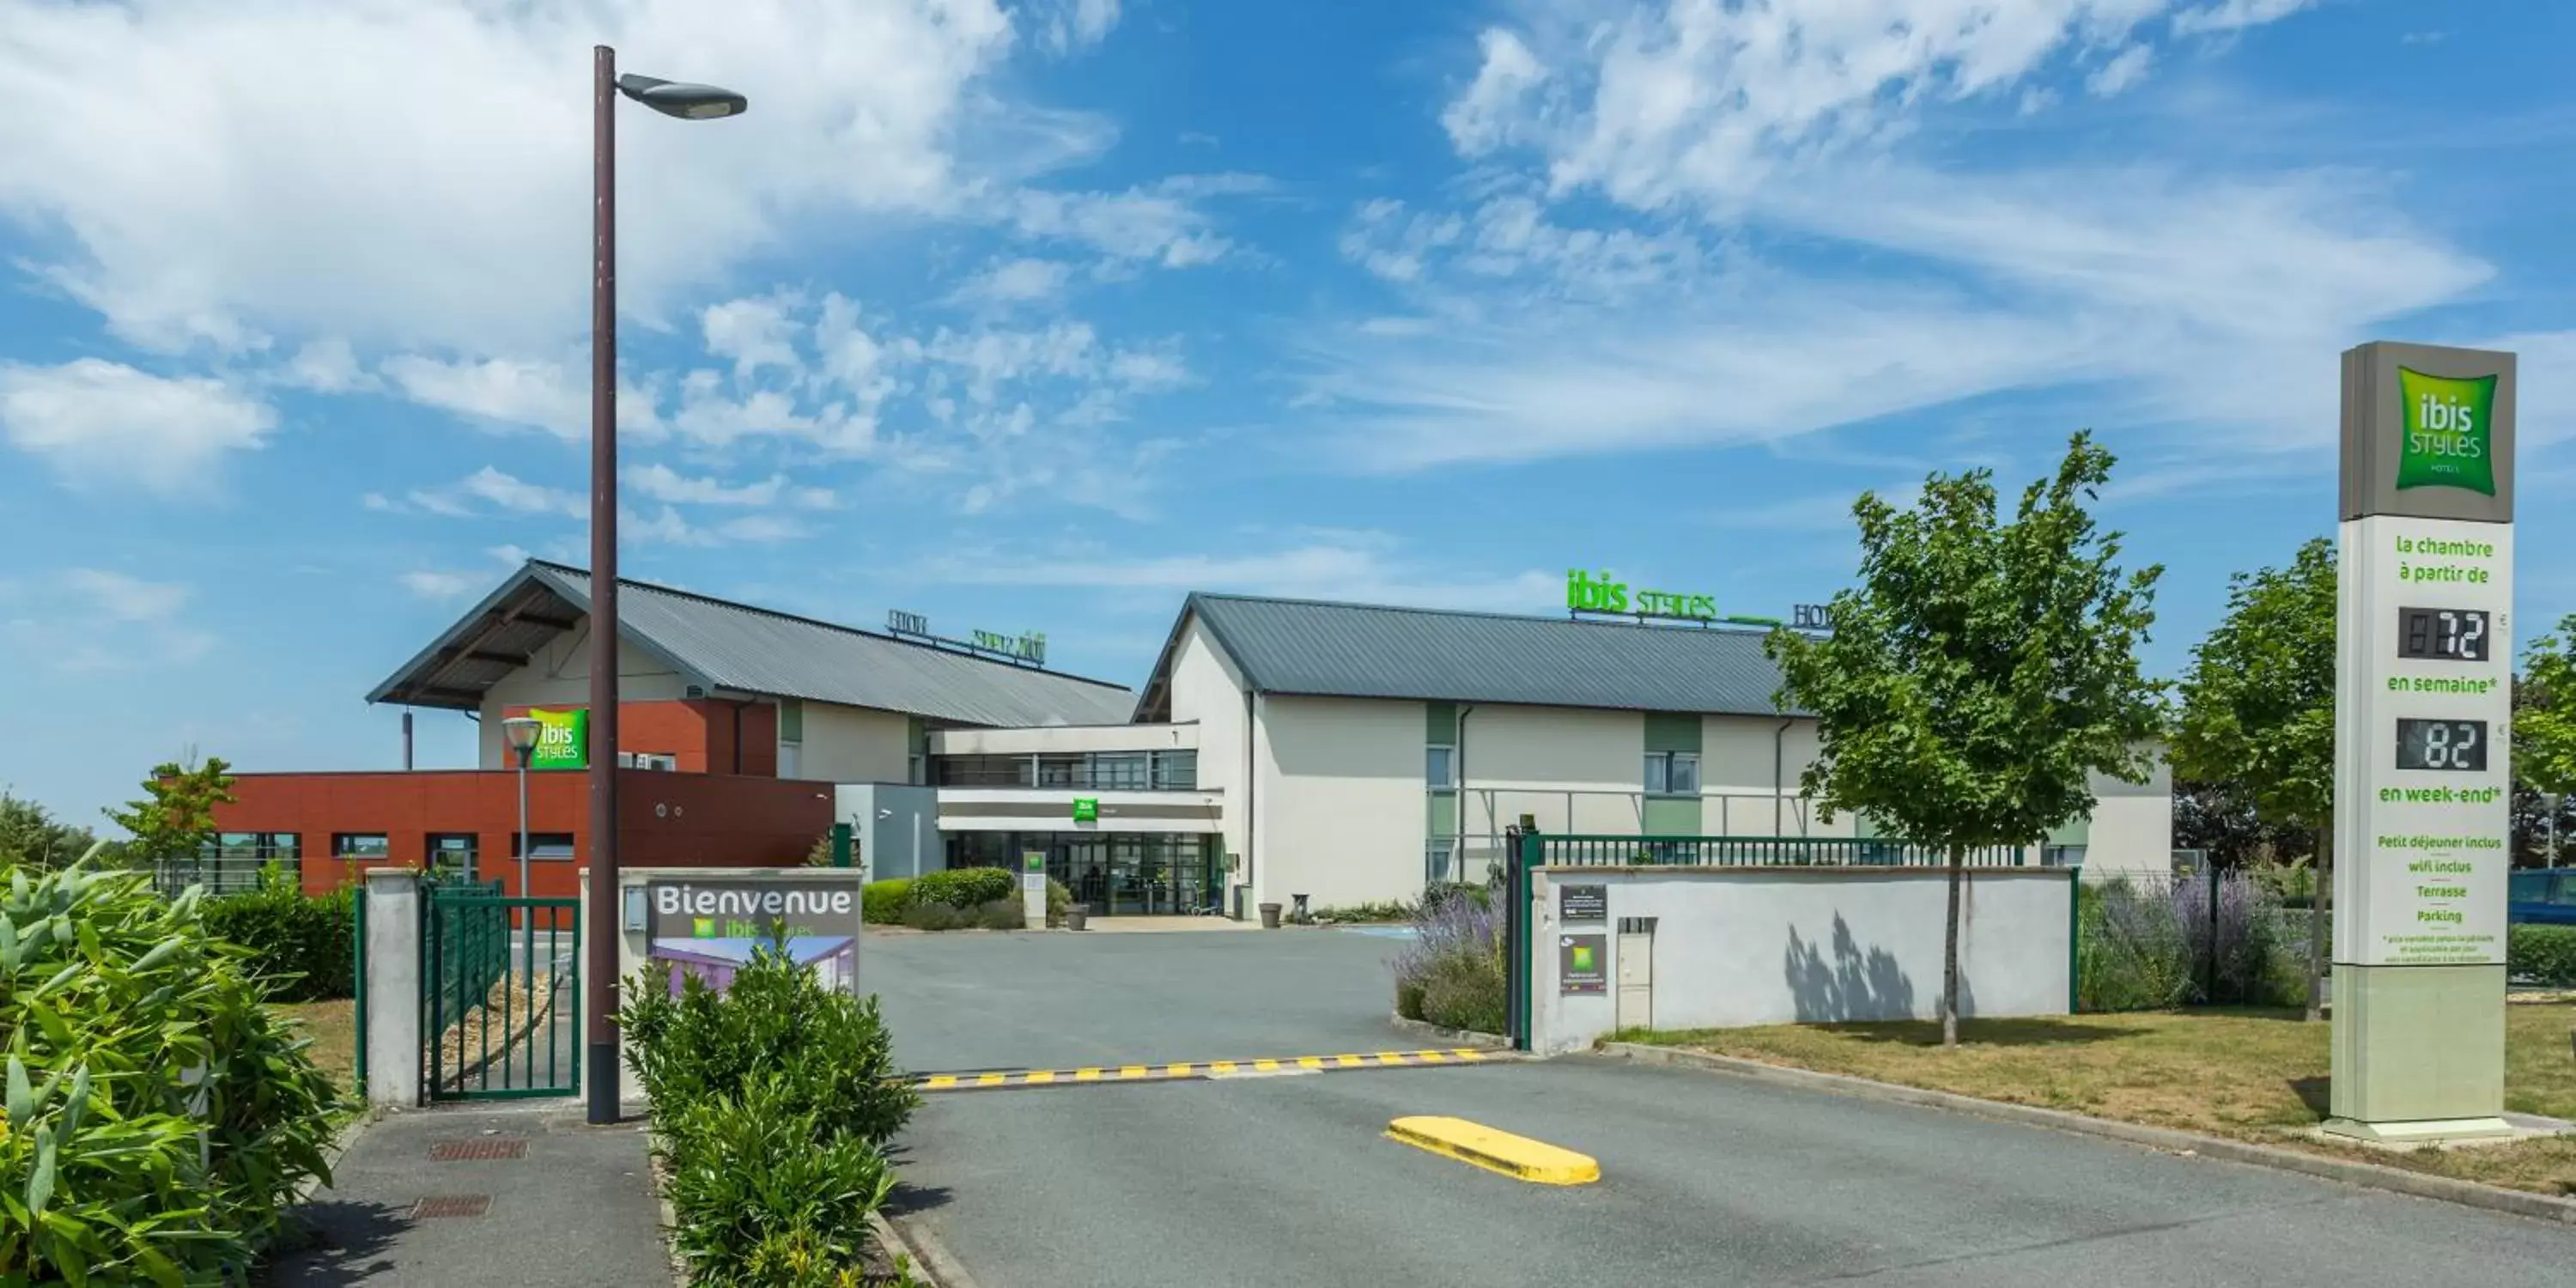 Property Building in ibis Styles Bourges